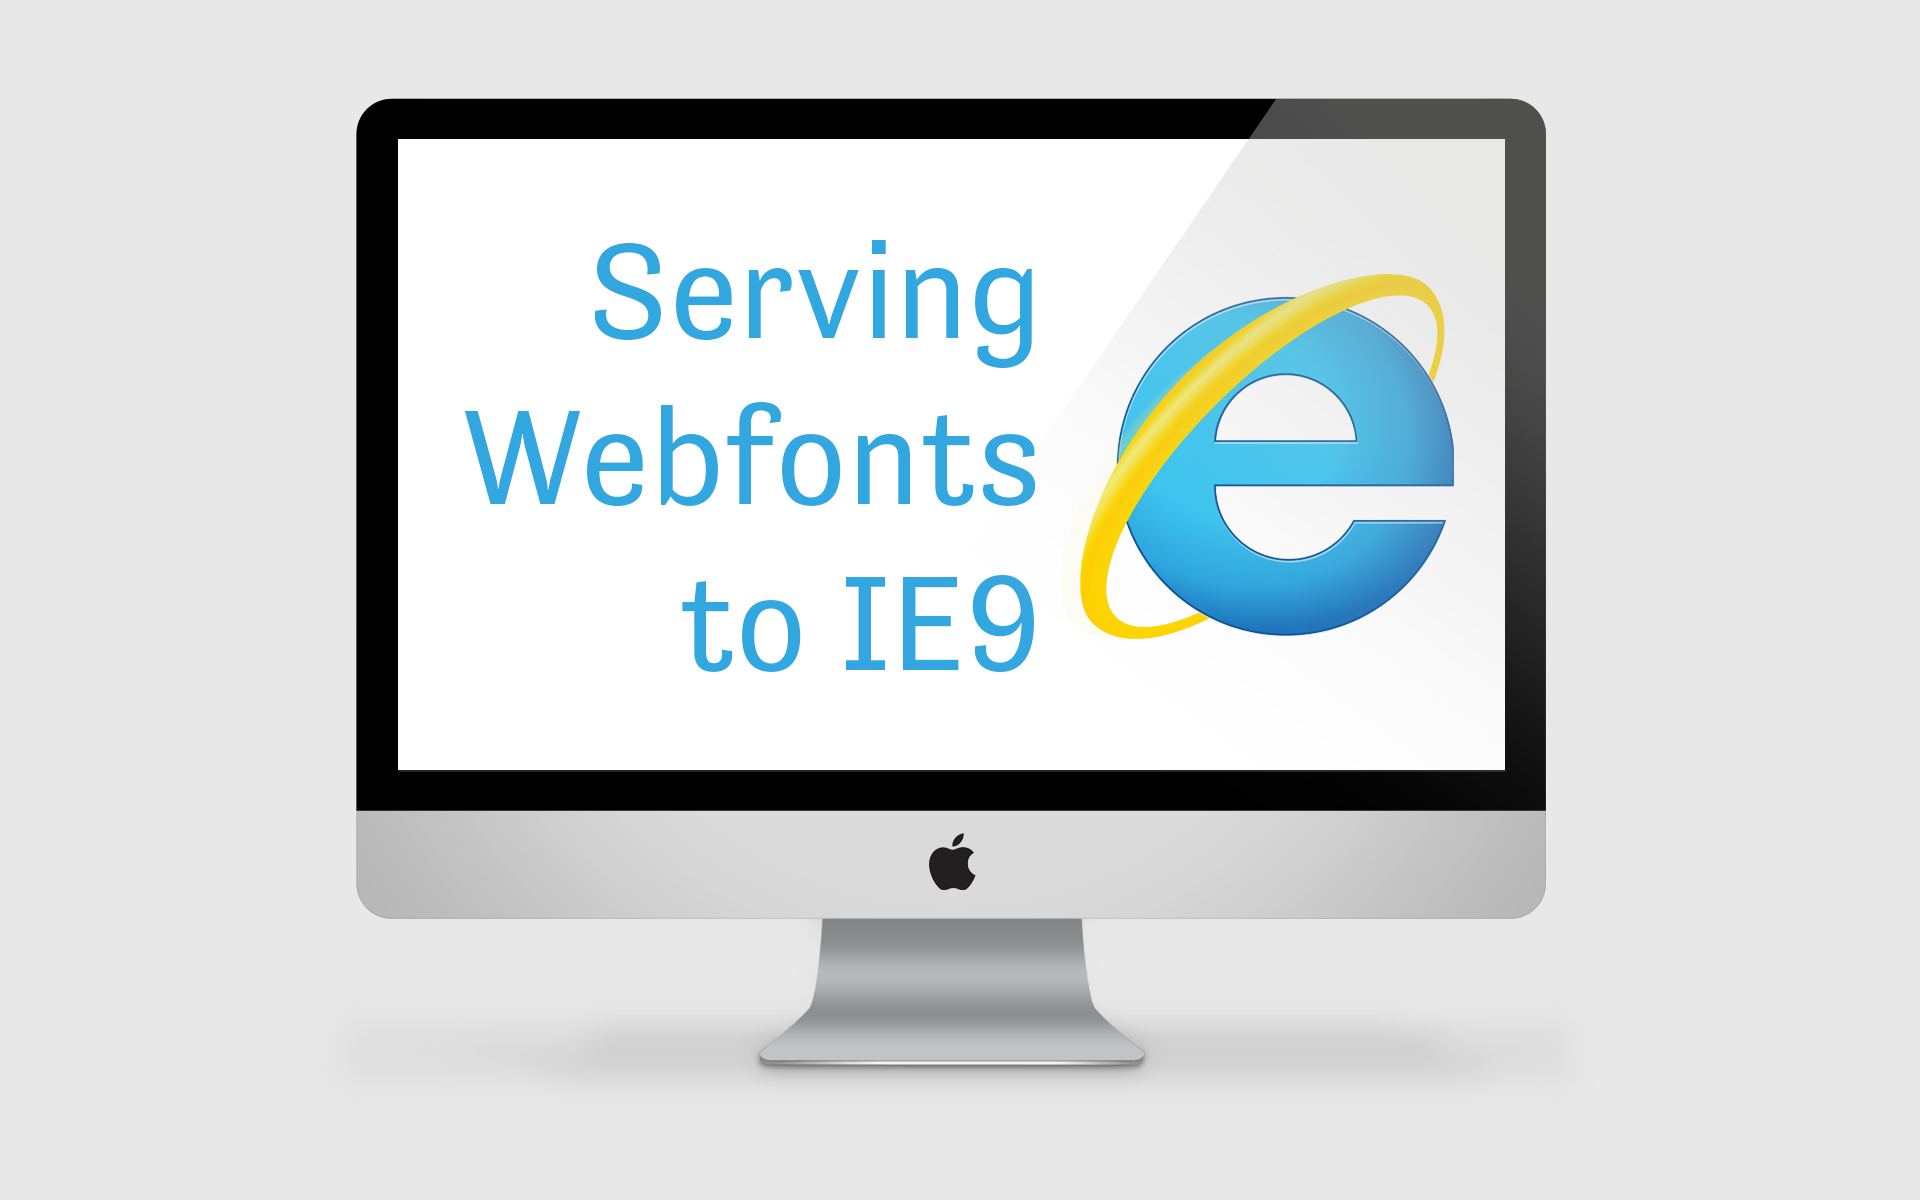 Best Practices for Serving Webfonts to IE9